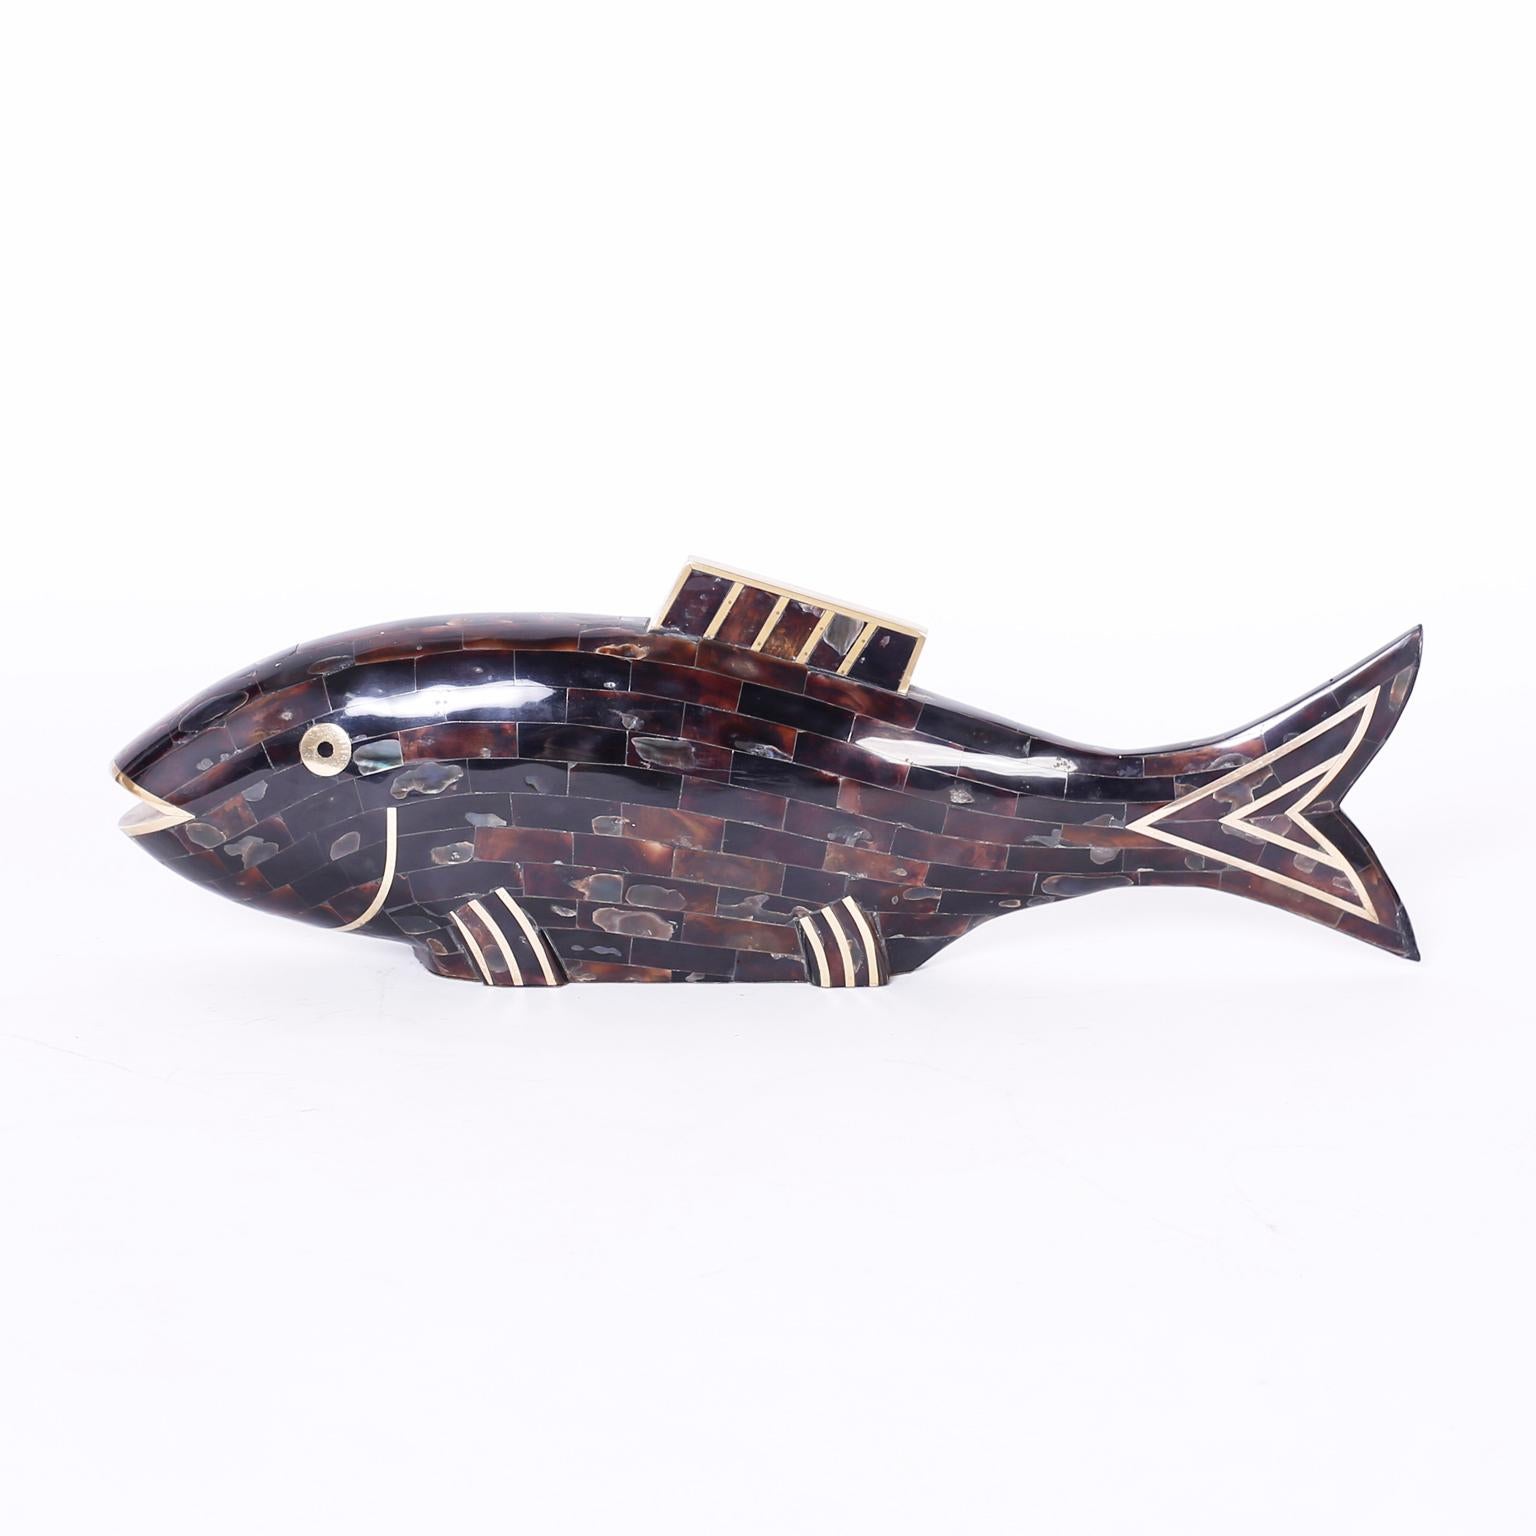 Midcentury stylized fish crafted with penshell in a tessellated technique with brass highlights. Signed Maitland-Smith on the bottom.